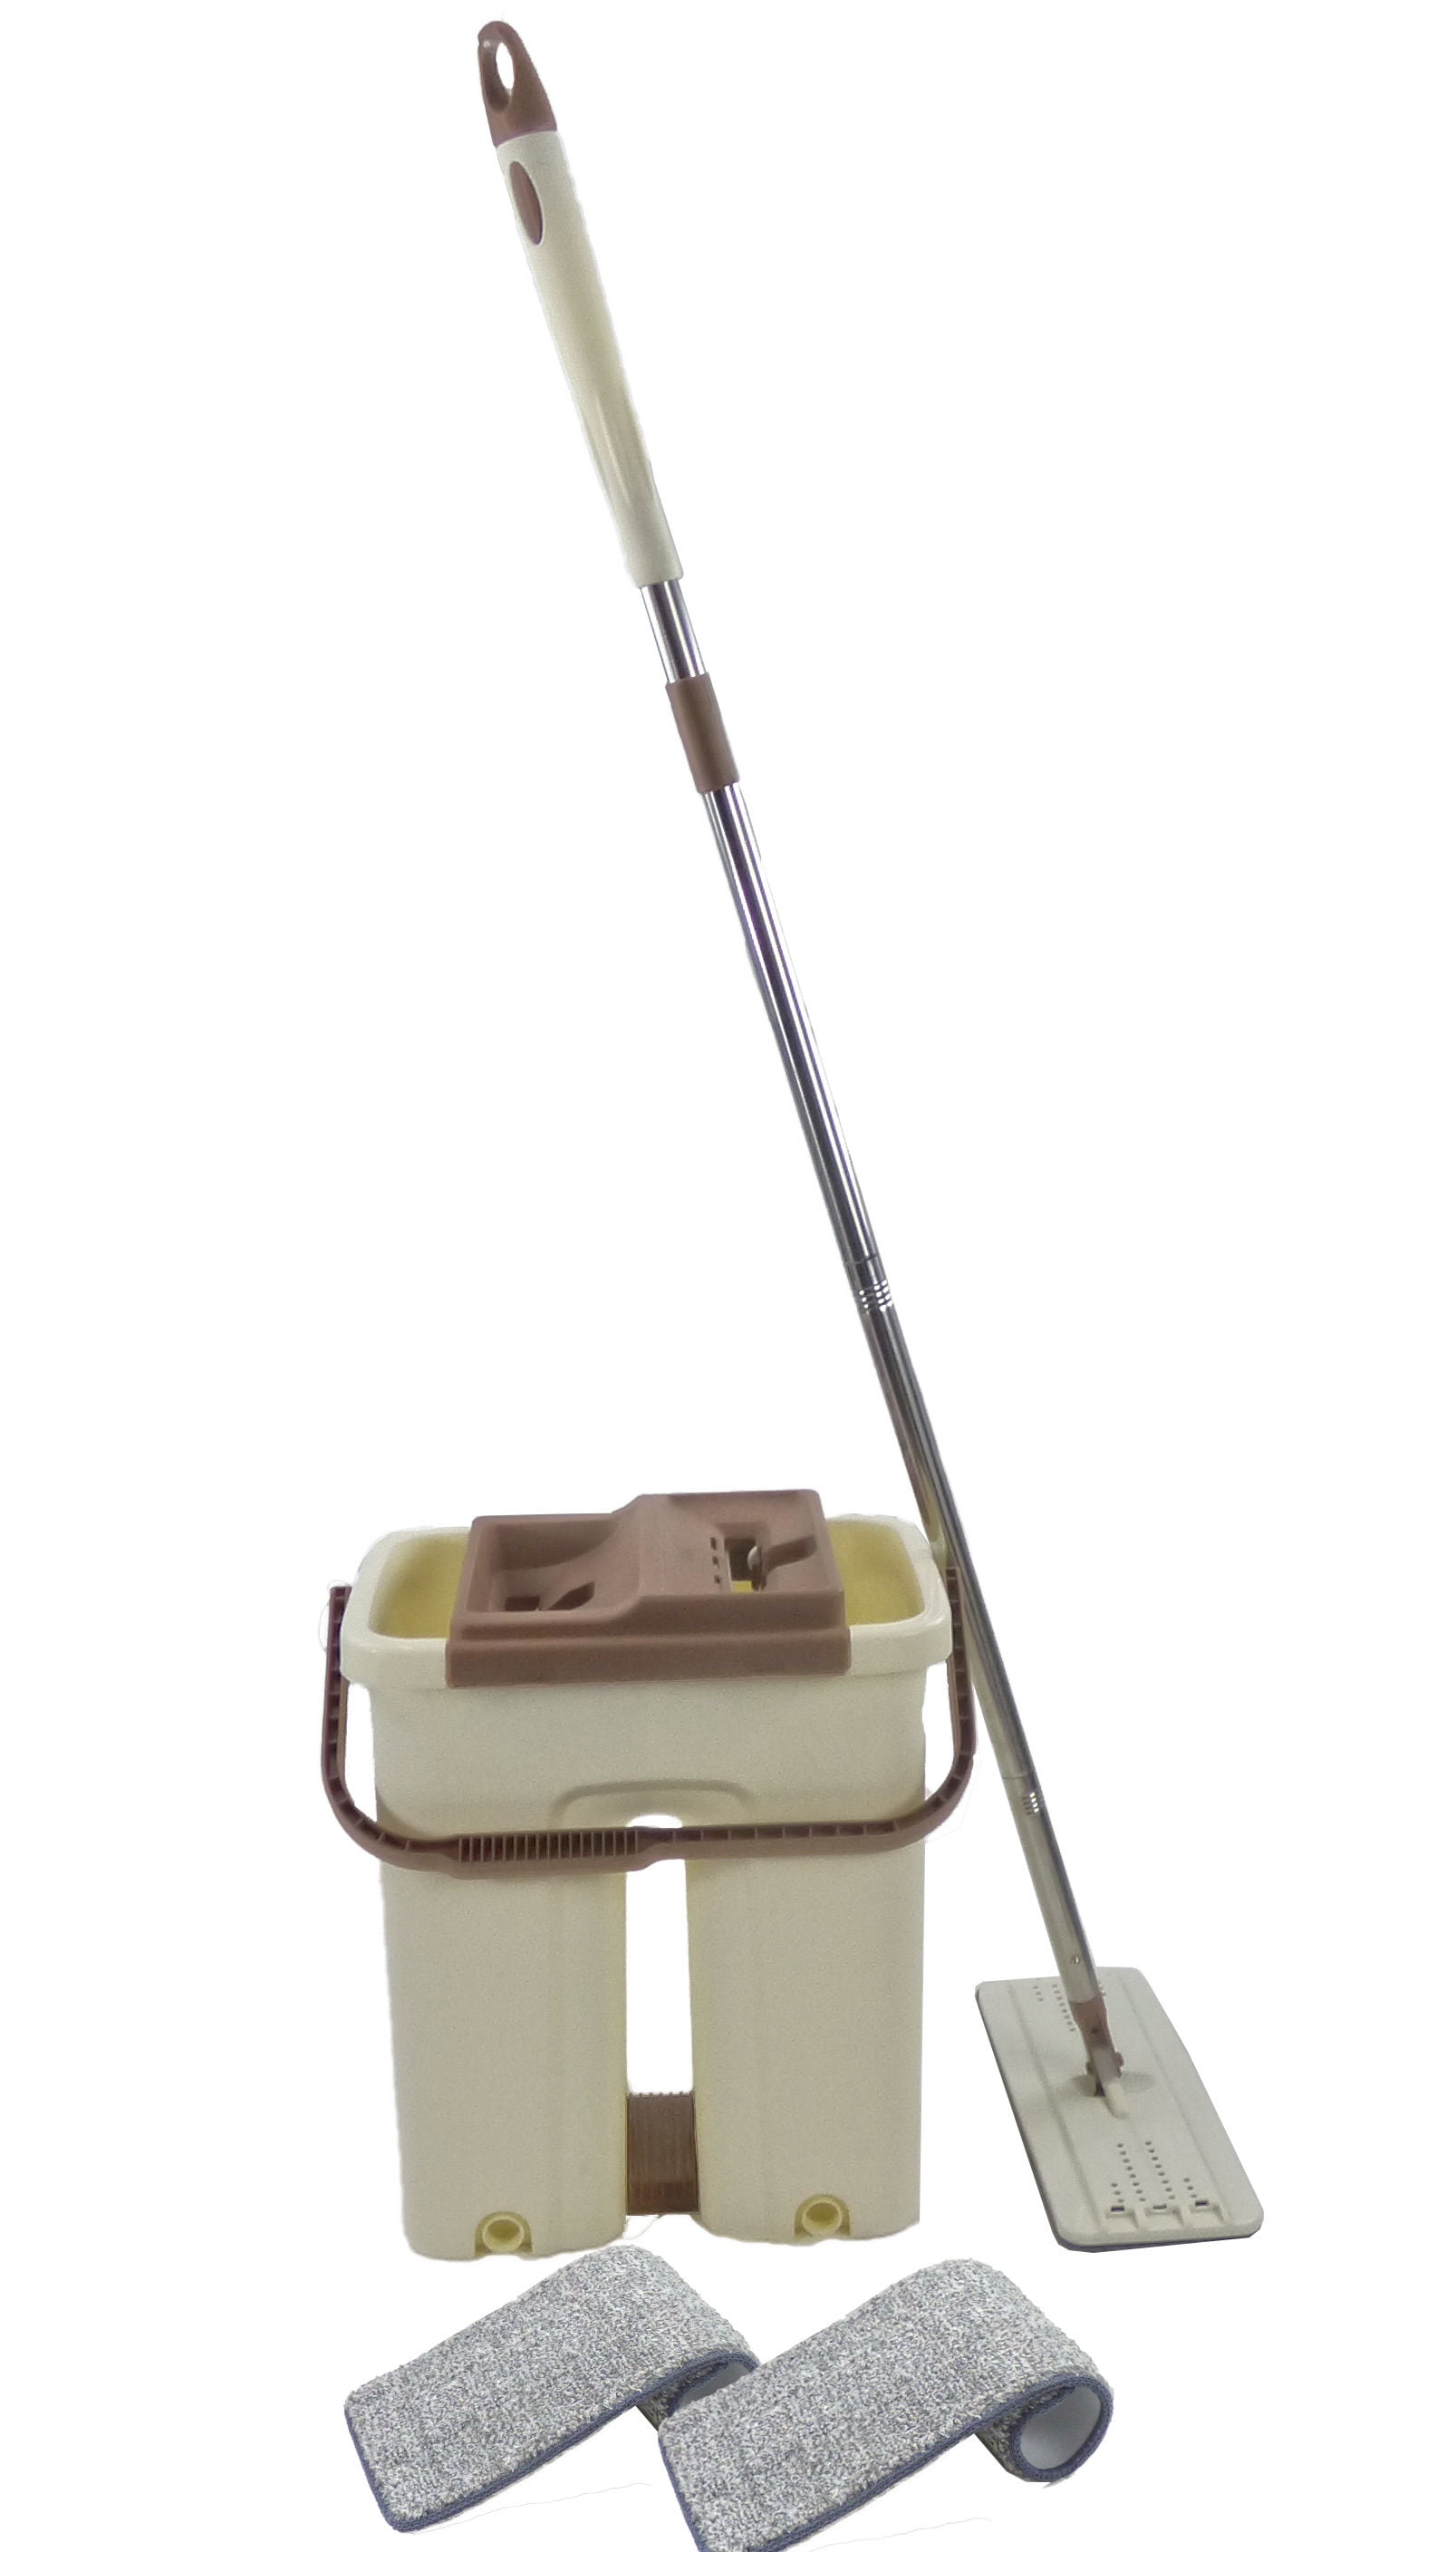 Hands Free Self Cleaning System Retractable Flat Mop Bucket 4 Microfiber Pads 